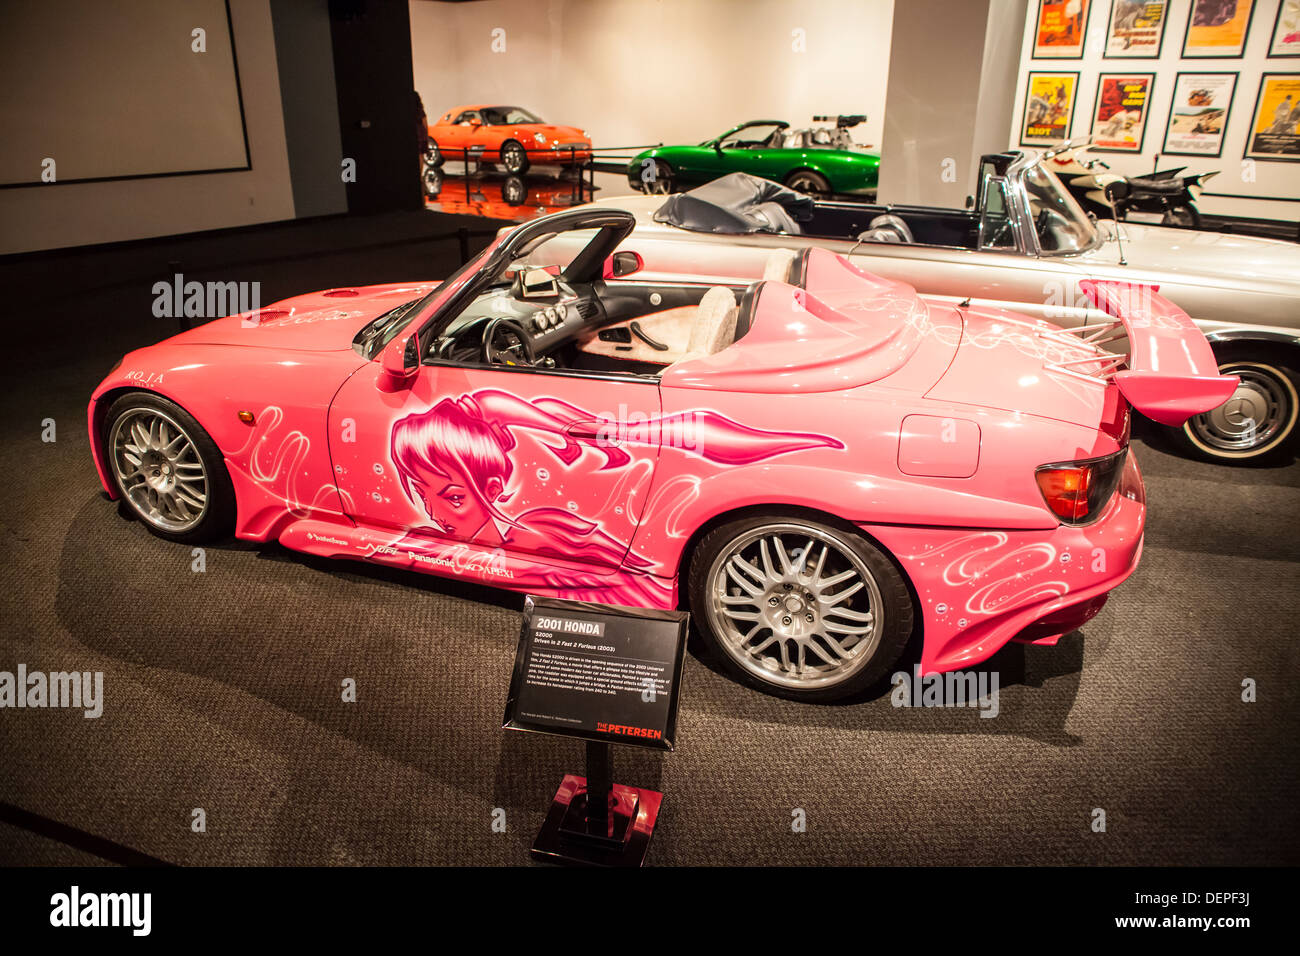 2 fast 2 furious pink s2000